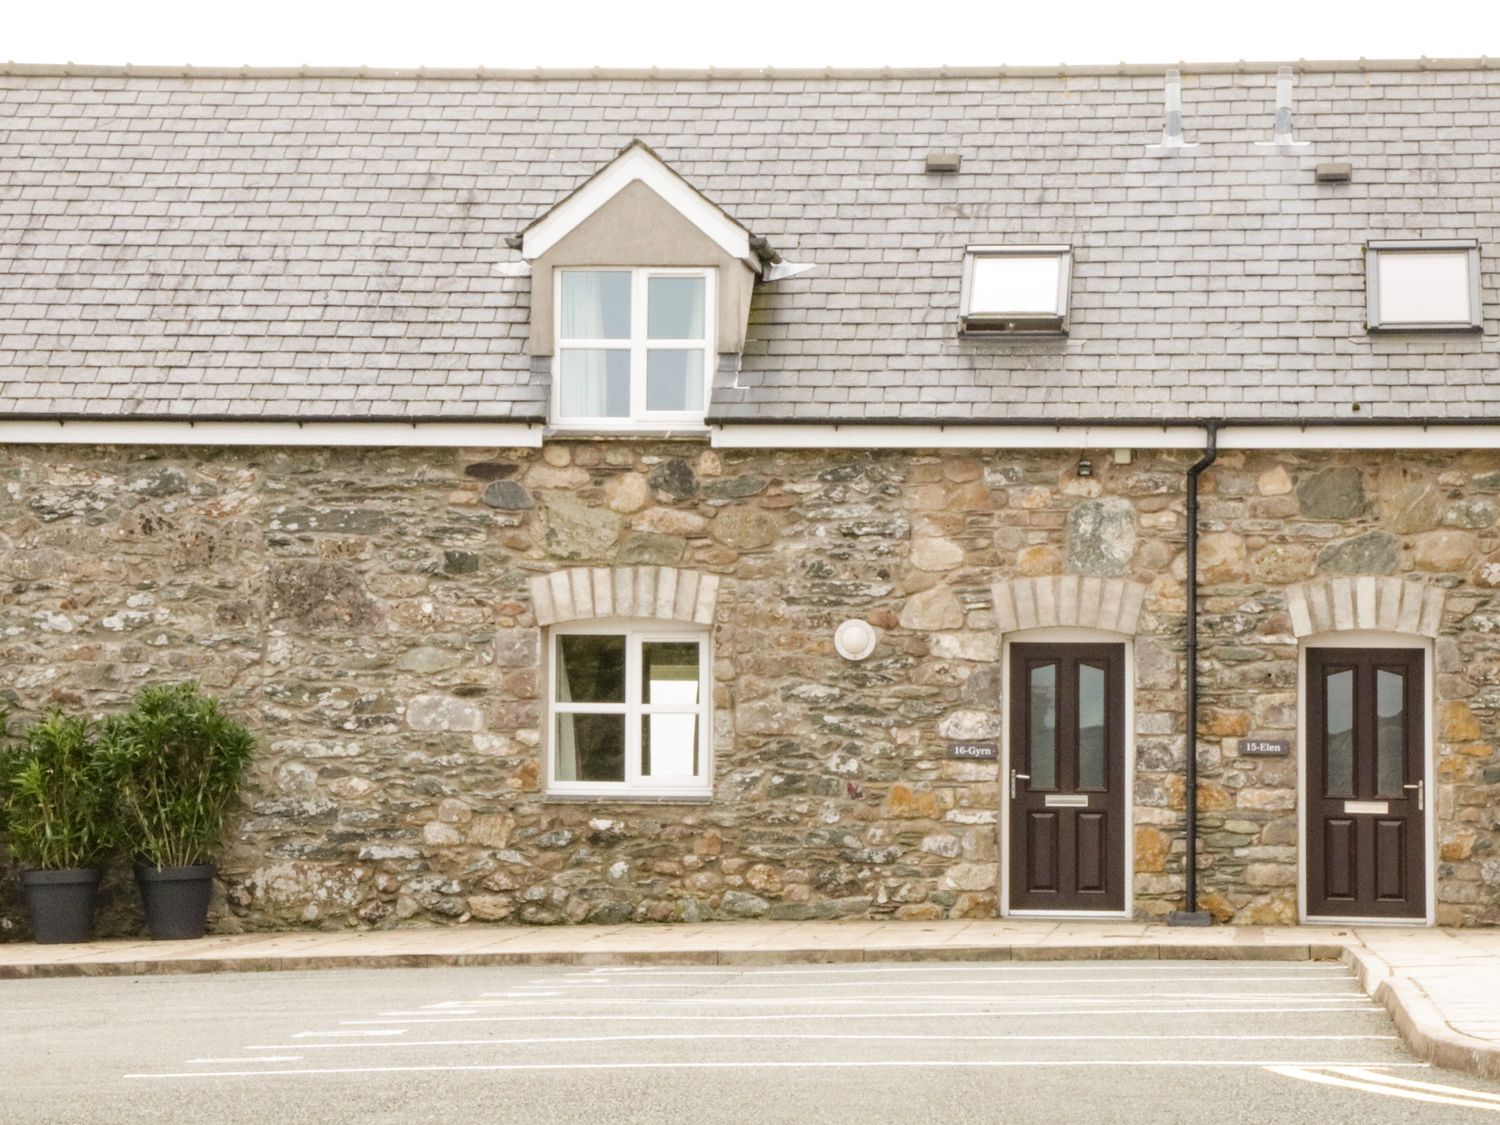 16 Cefn Cwmwd Cottages - Anglesey - 1070900 - photo 1